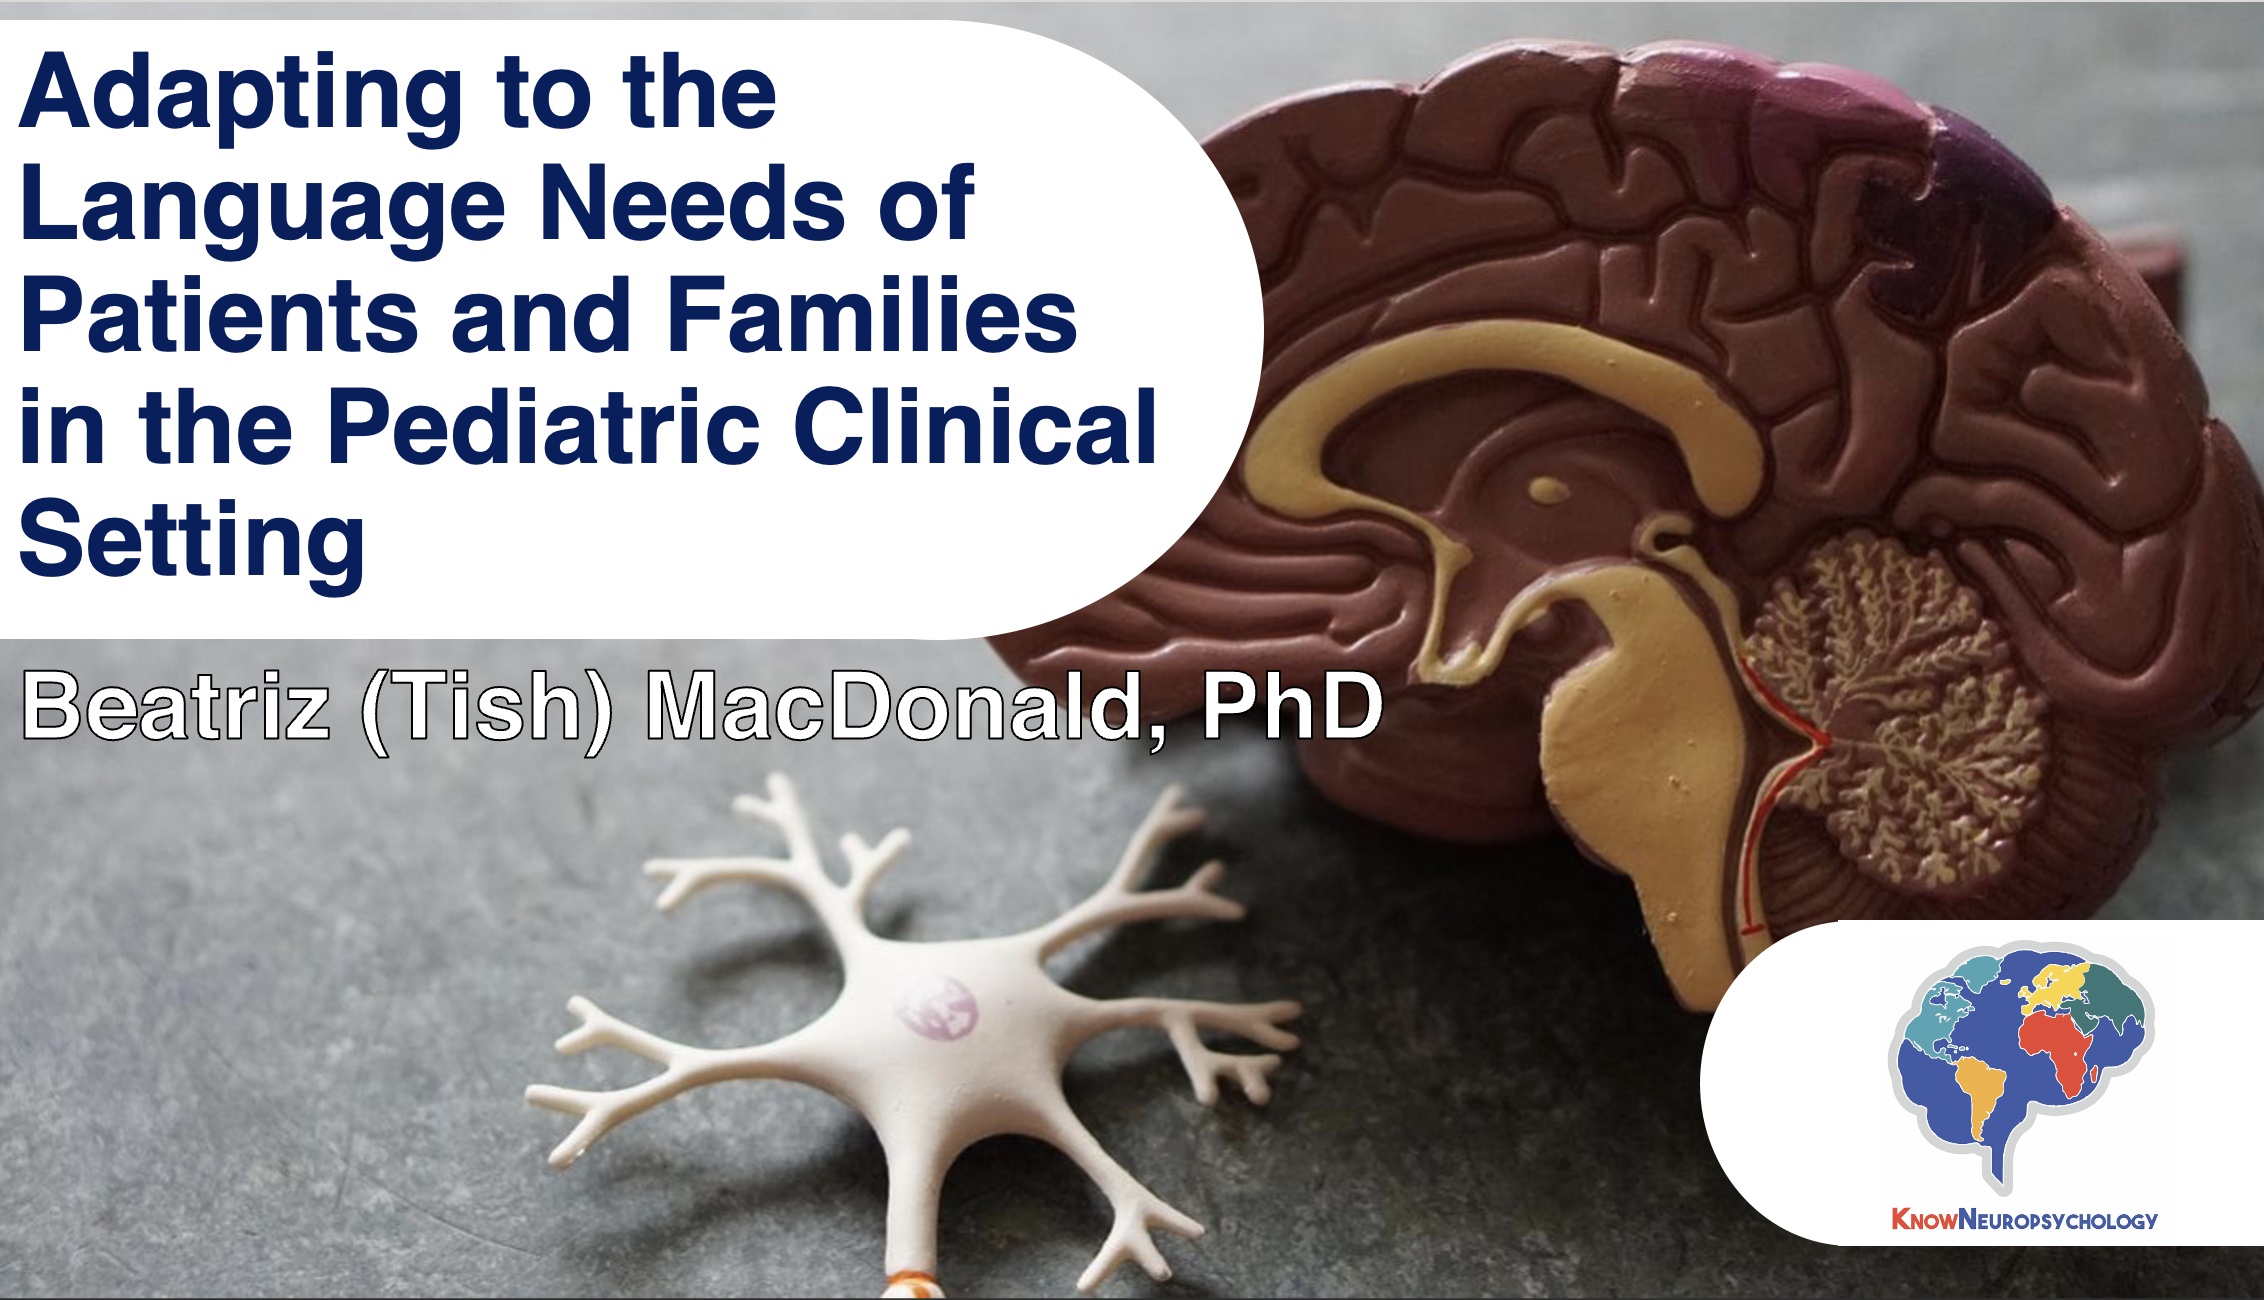 Adapting to the Language needs of patients and families in the pediatric clinical setting by Dr. Beatriz (Tish) MacDonald